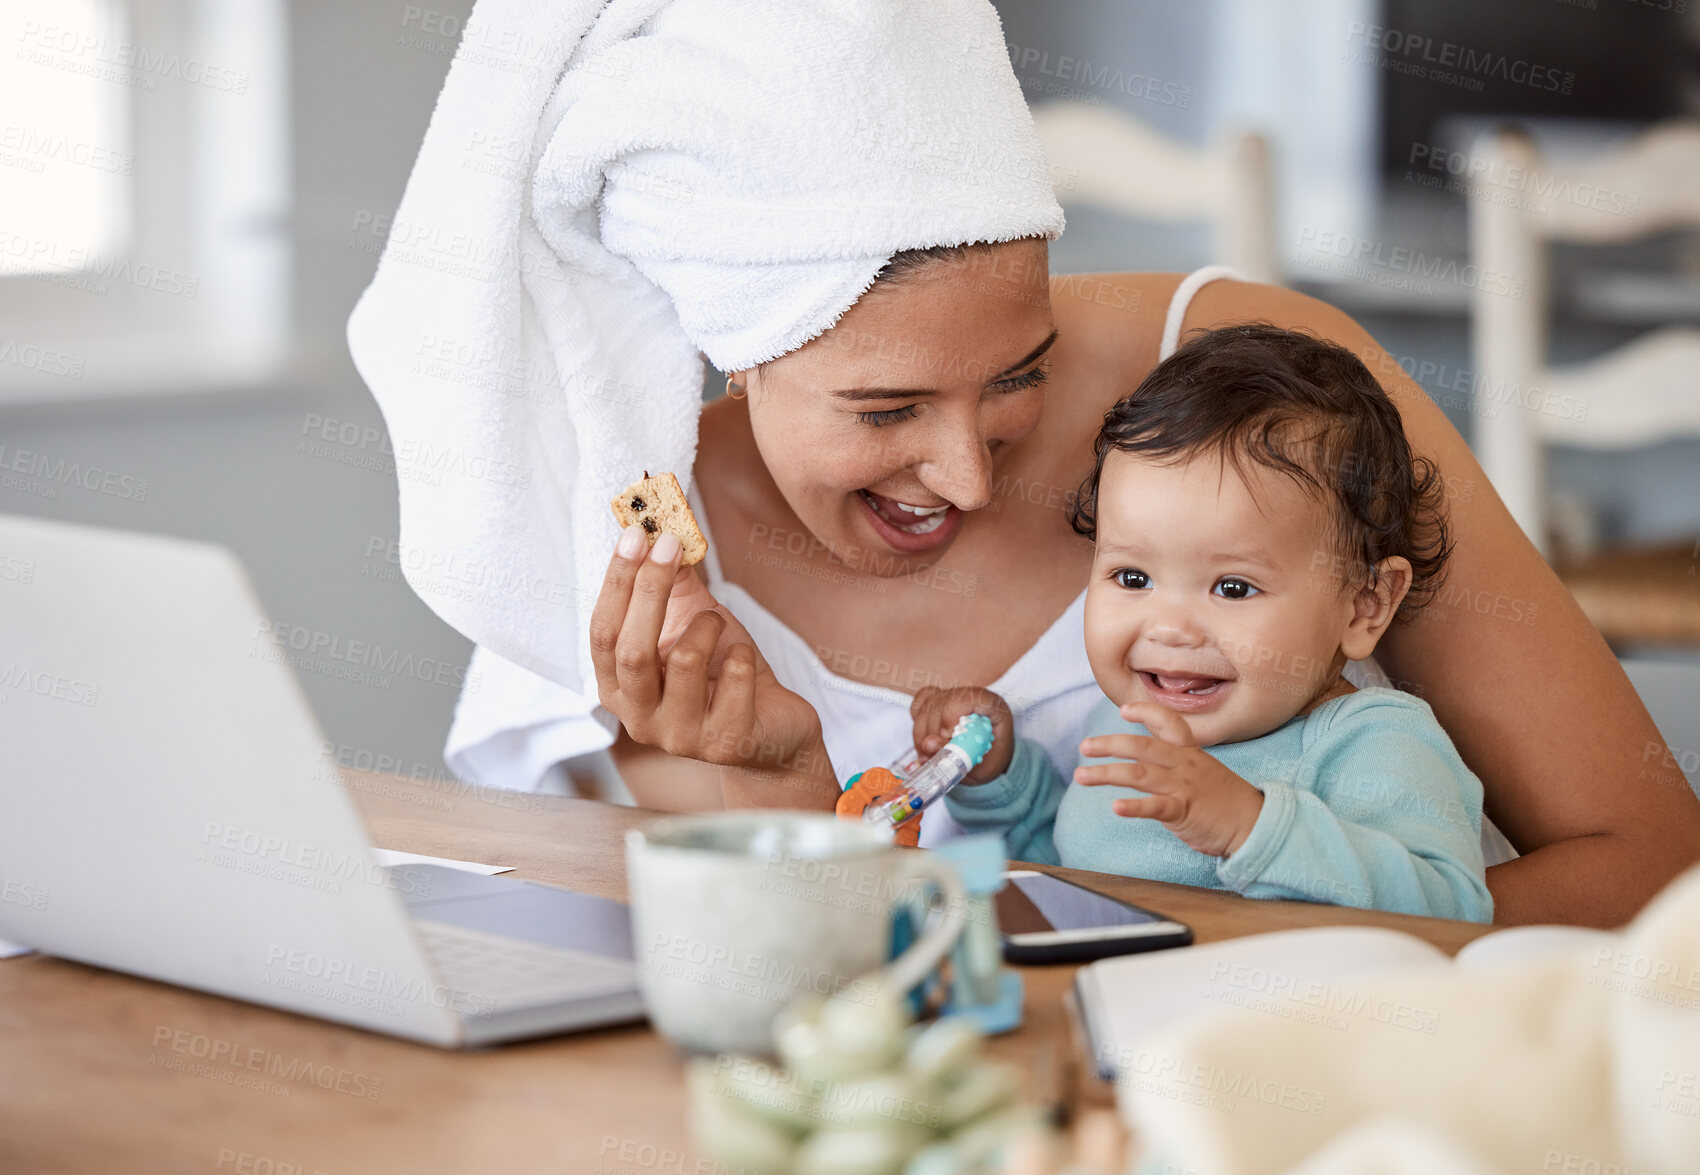 Buy stock photo Shot of a woman eating rusks while working on her laptop and holding her baby on her lap